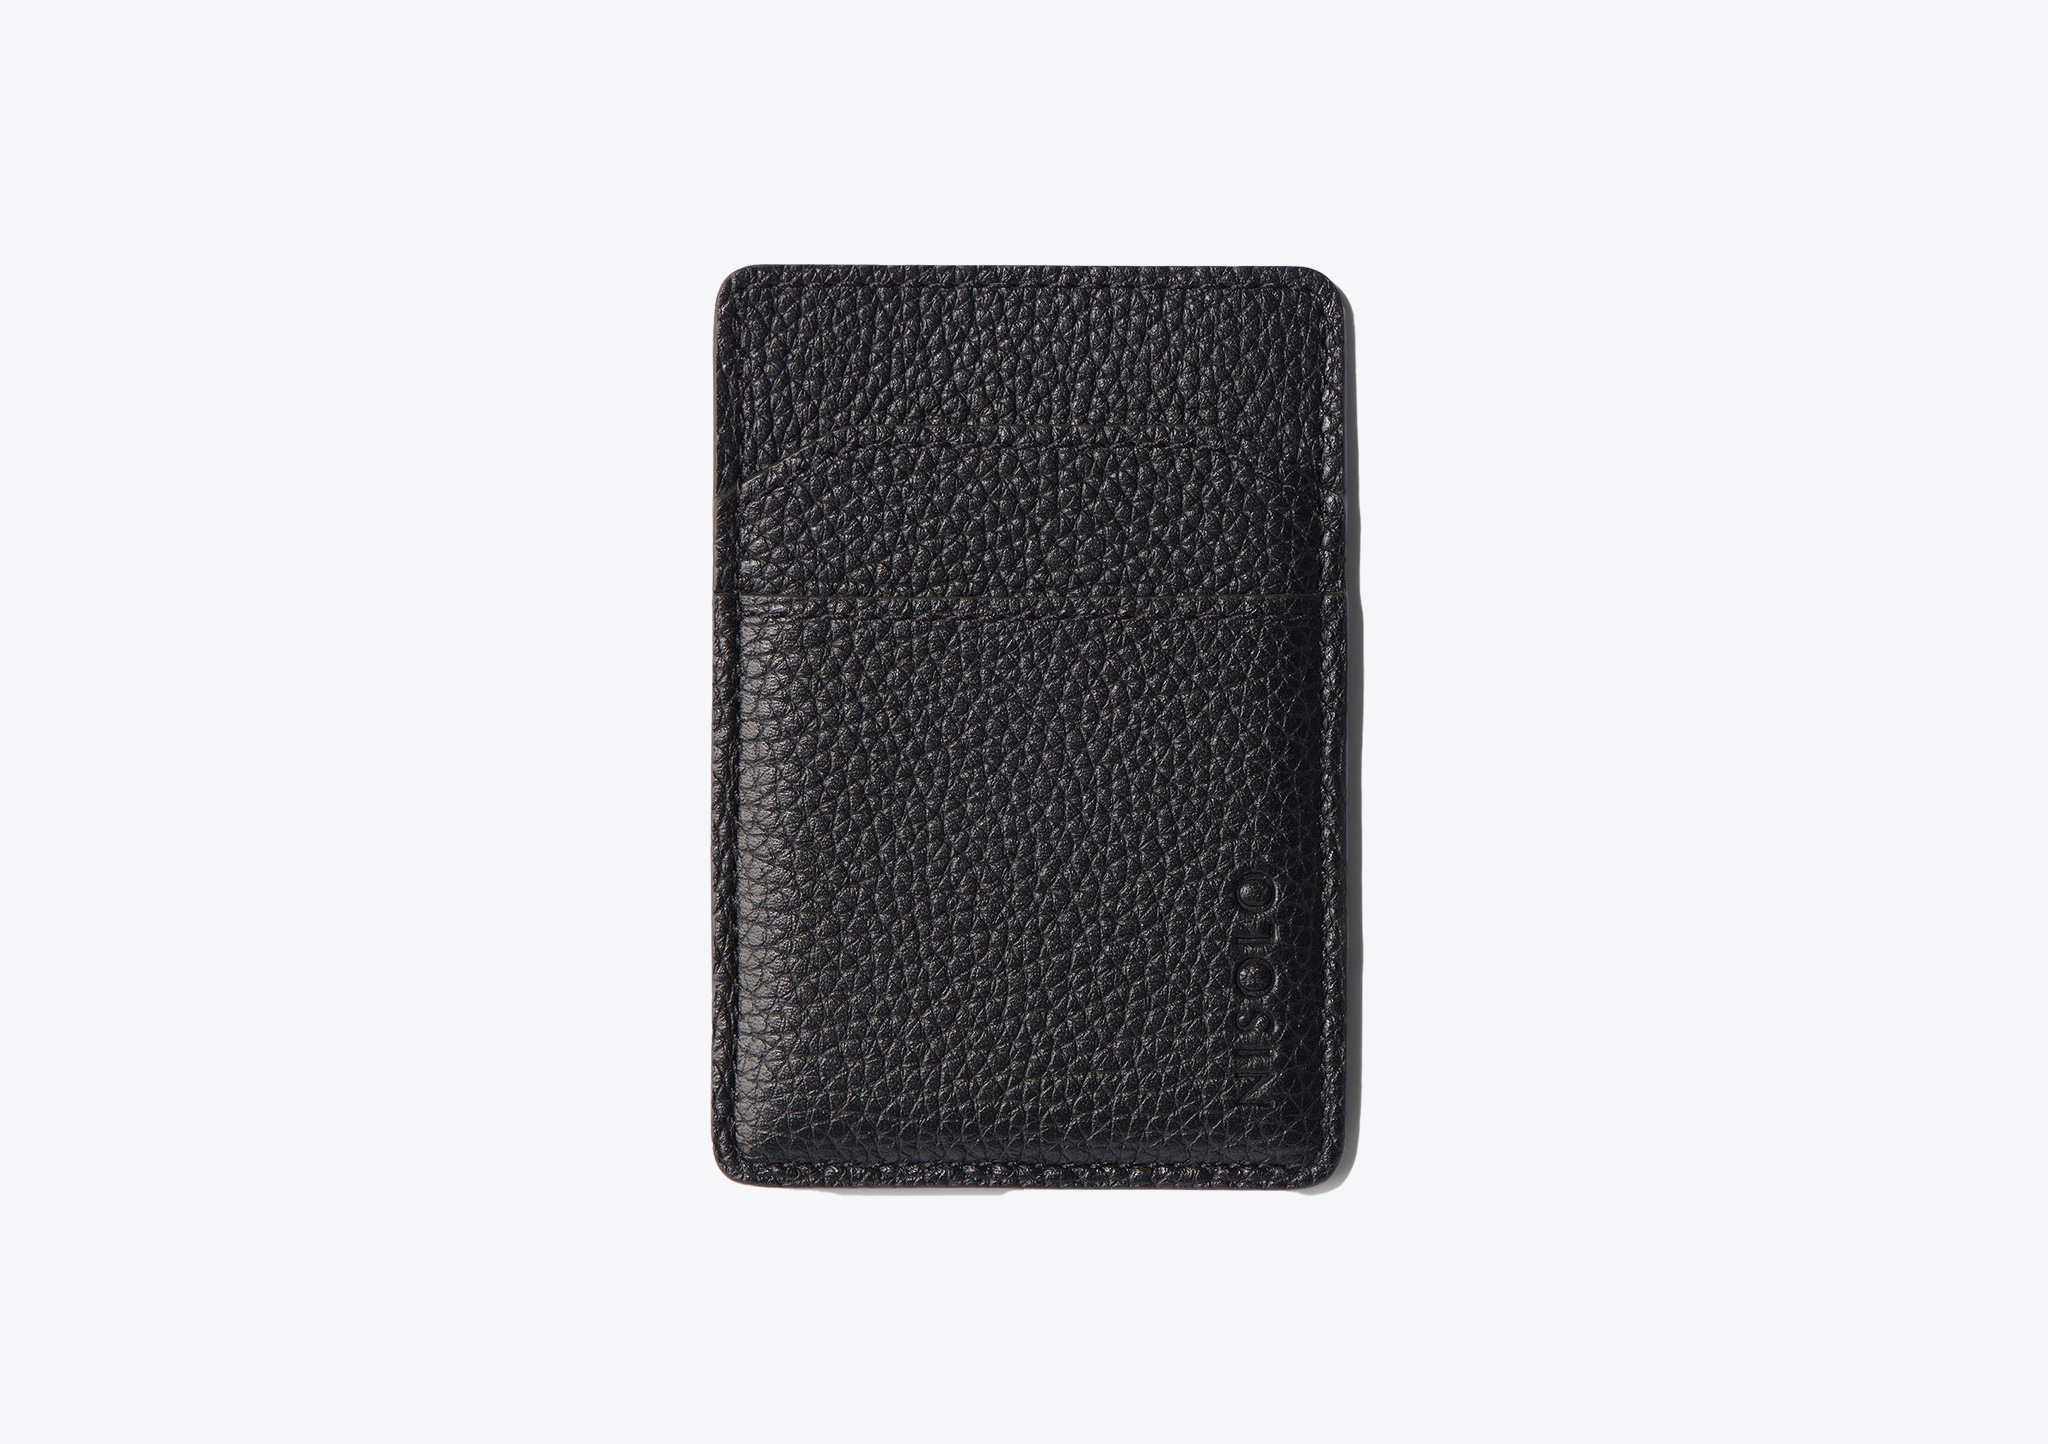 Nisolo Nico Card Case Wallet Black - Every Nisolo product is built on the foundation of comfort, function, and design. 